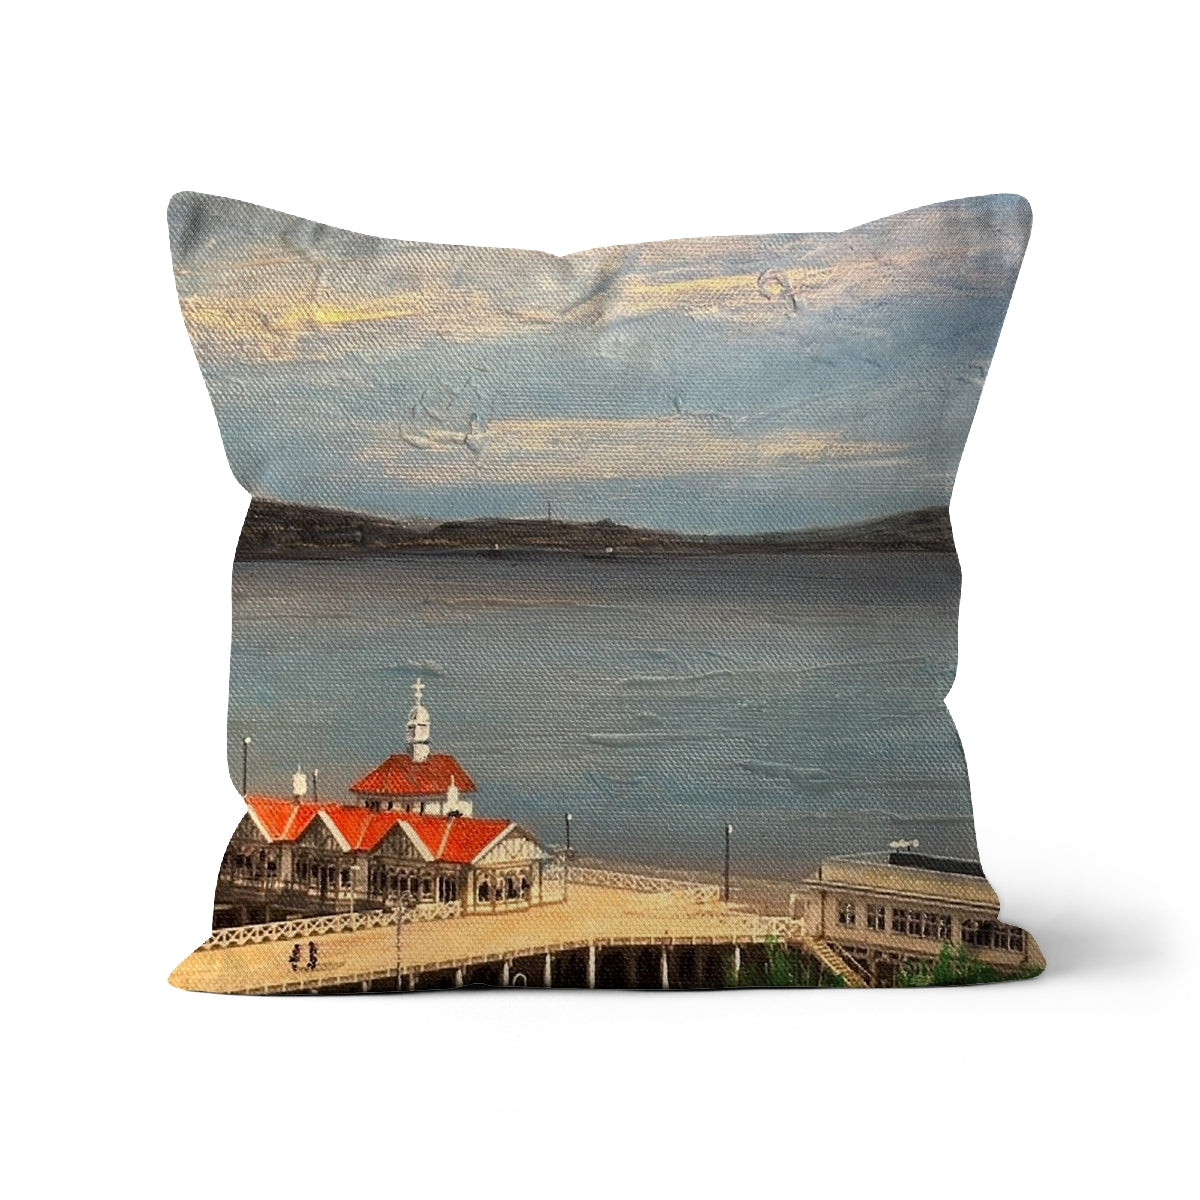 Looking From Dunoon Art Gifts Cushion-Cushions-River Clyde Art Gallery-Linen-16"x16"-Paintings, Prints, Homeware, Art Gifts From Scotland By Scottish Artist Kevin Hunter